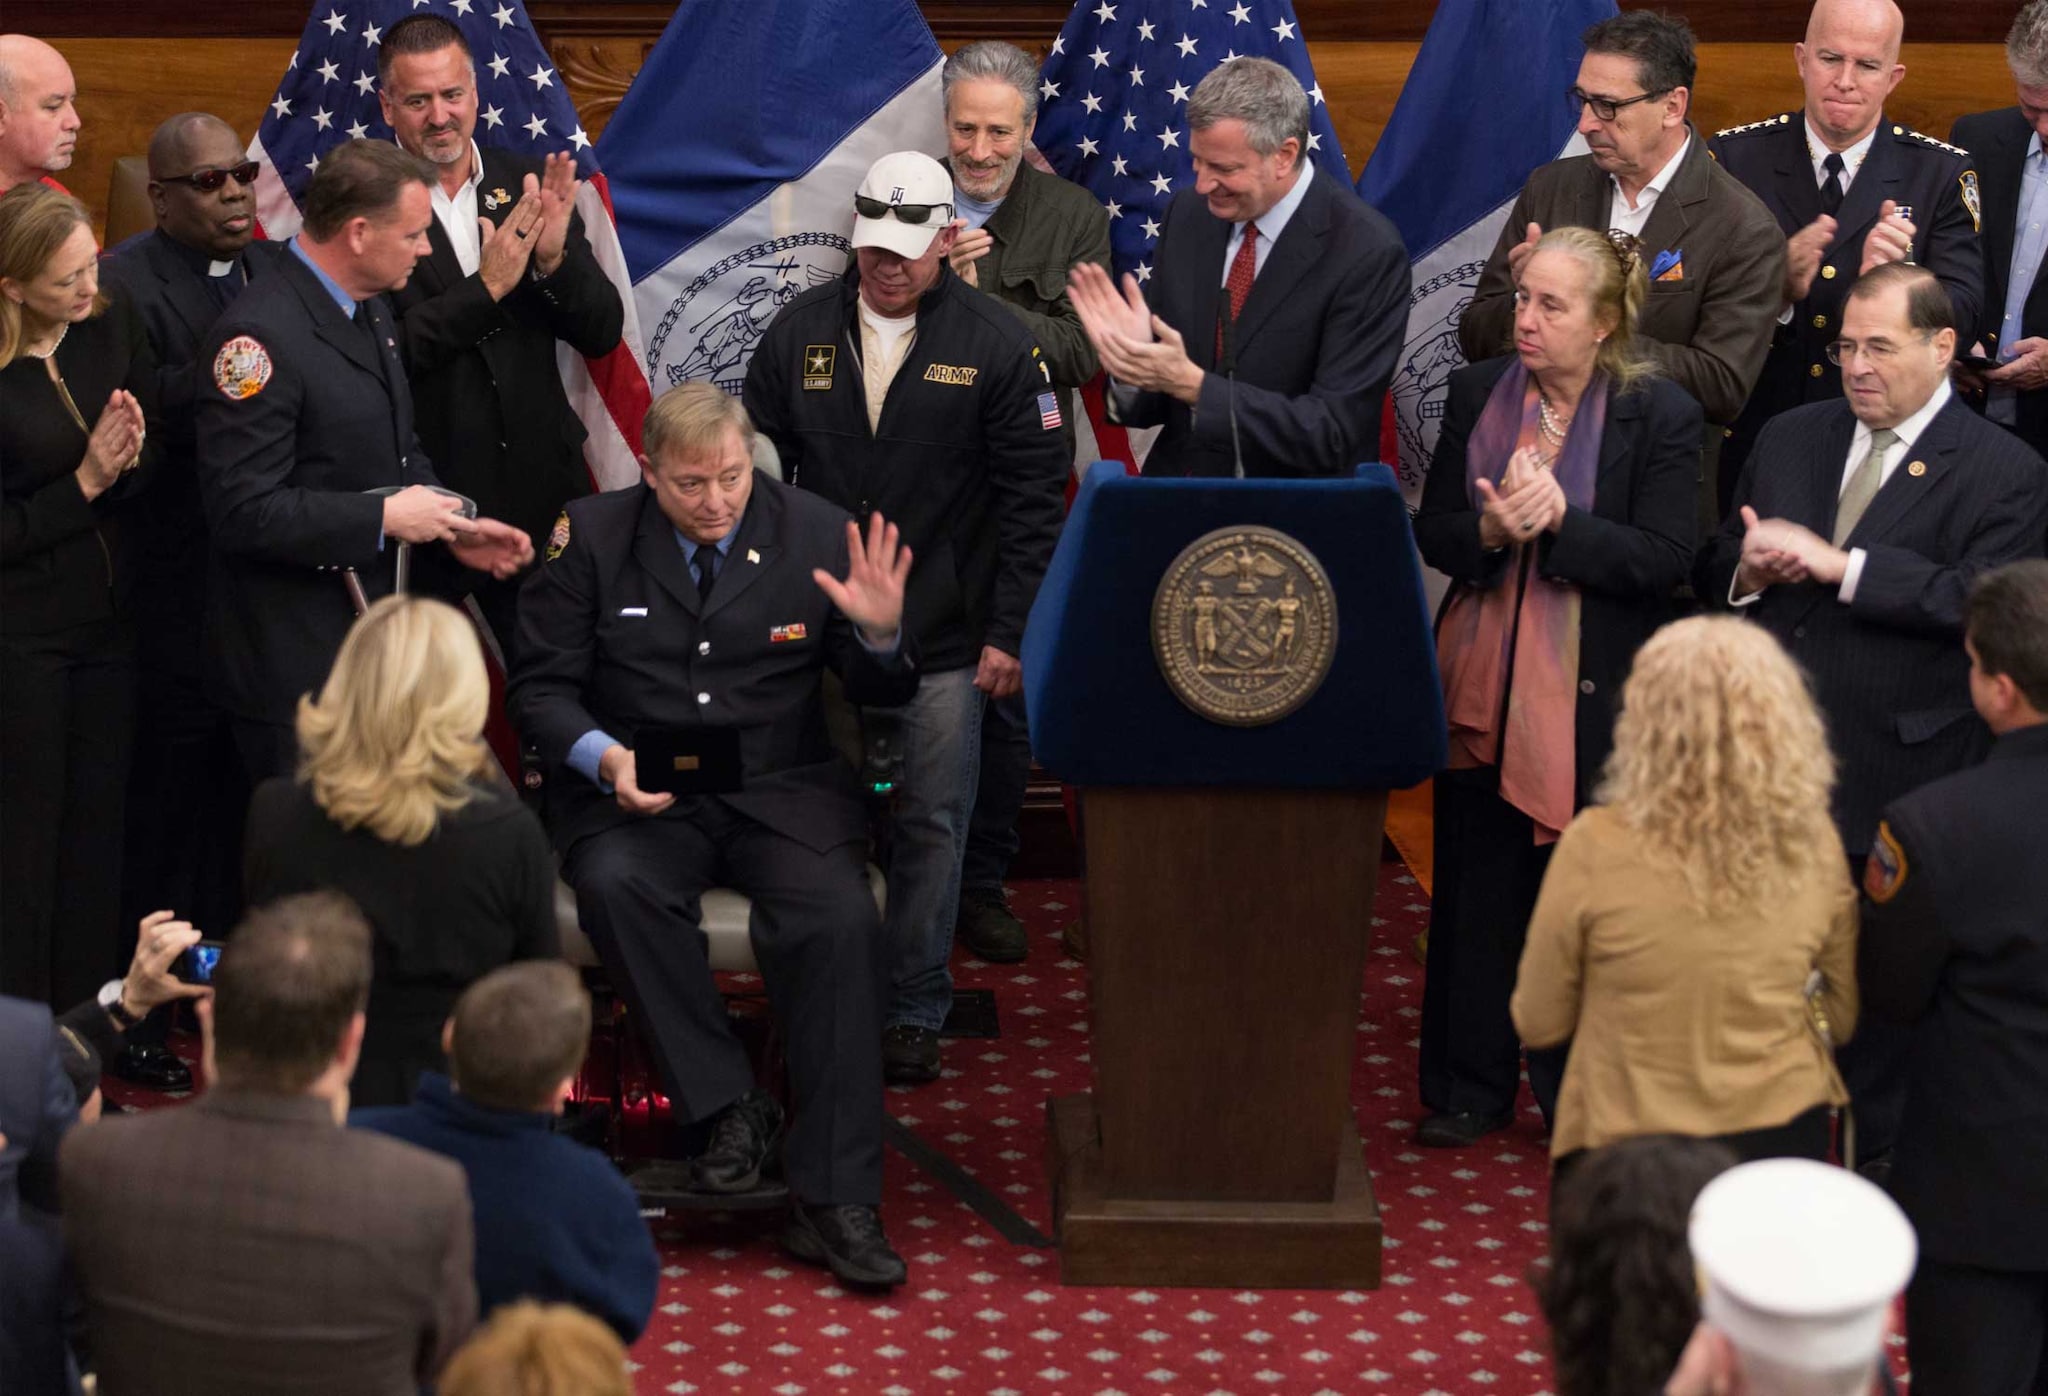 New York City Mayor Bill de Blasio hosts a celebration in January 2016 honoring the efforts of first responders, survivors, advocates, and lawmakers to reauthorize the Zadroga Act.